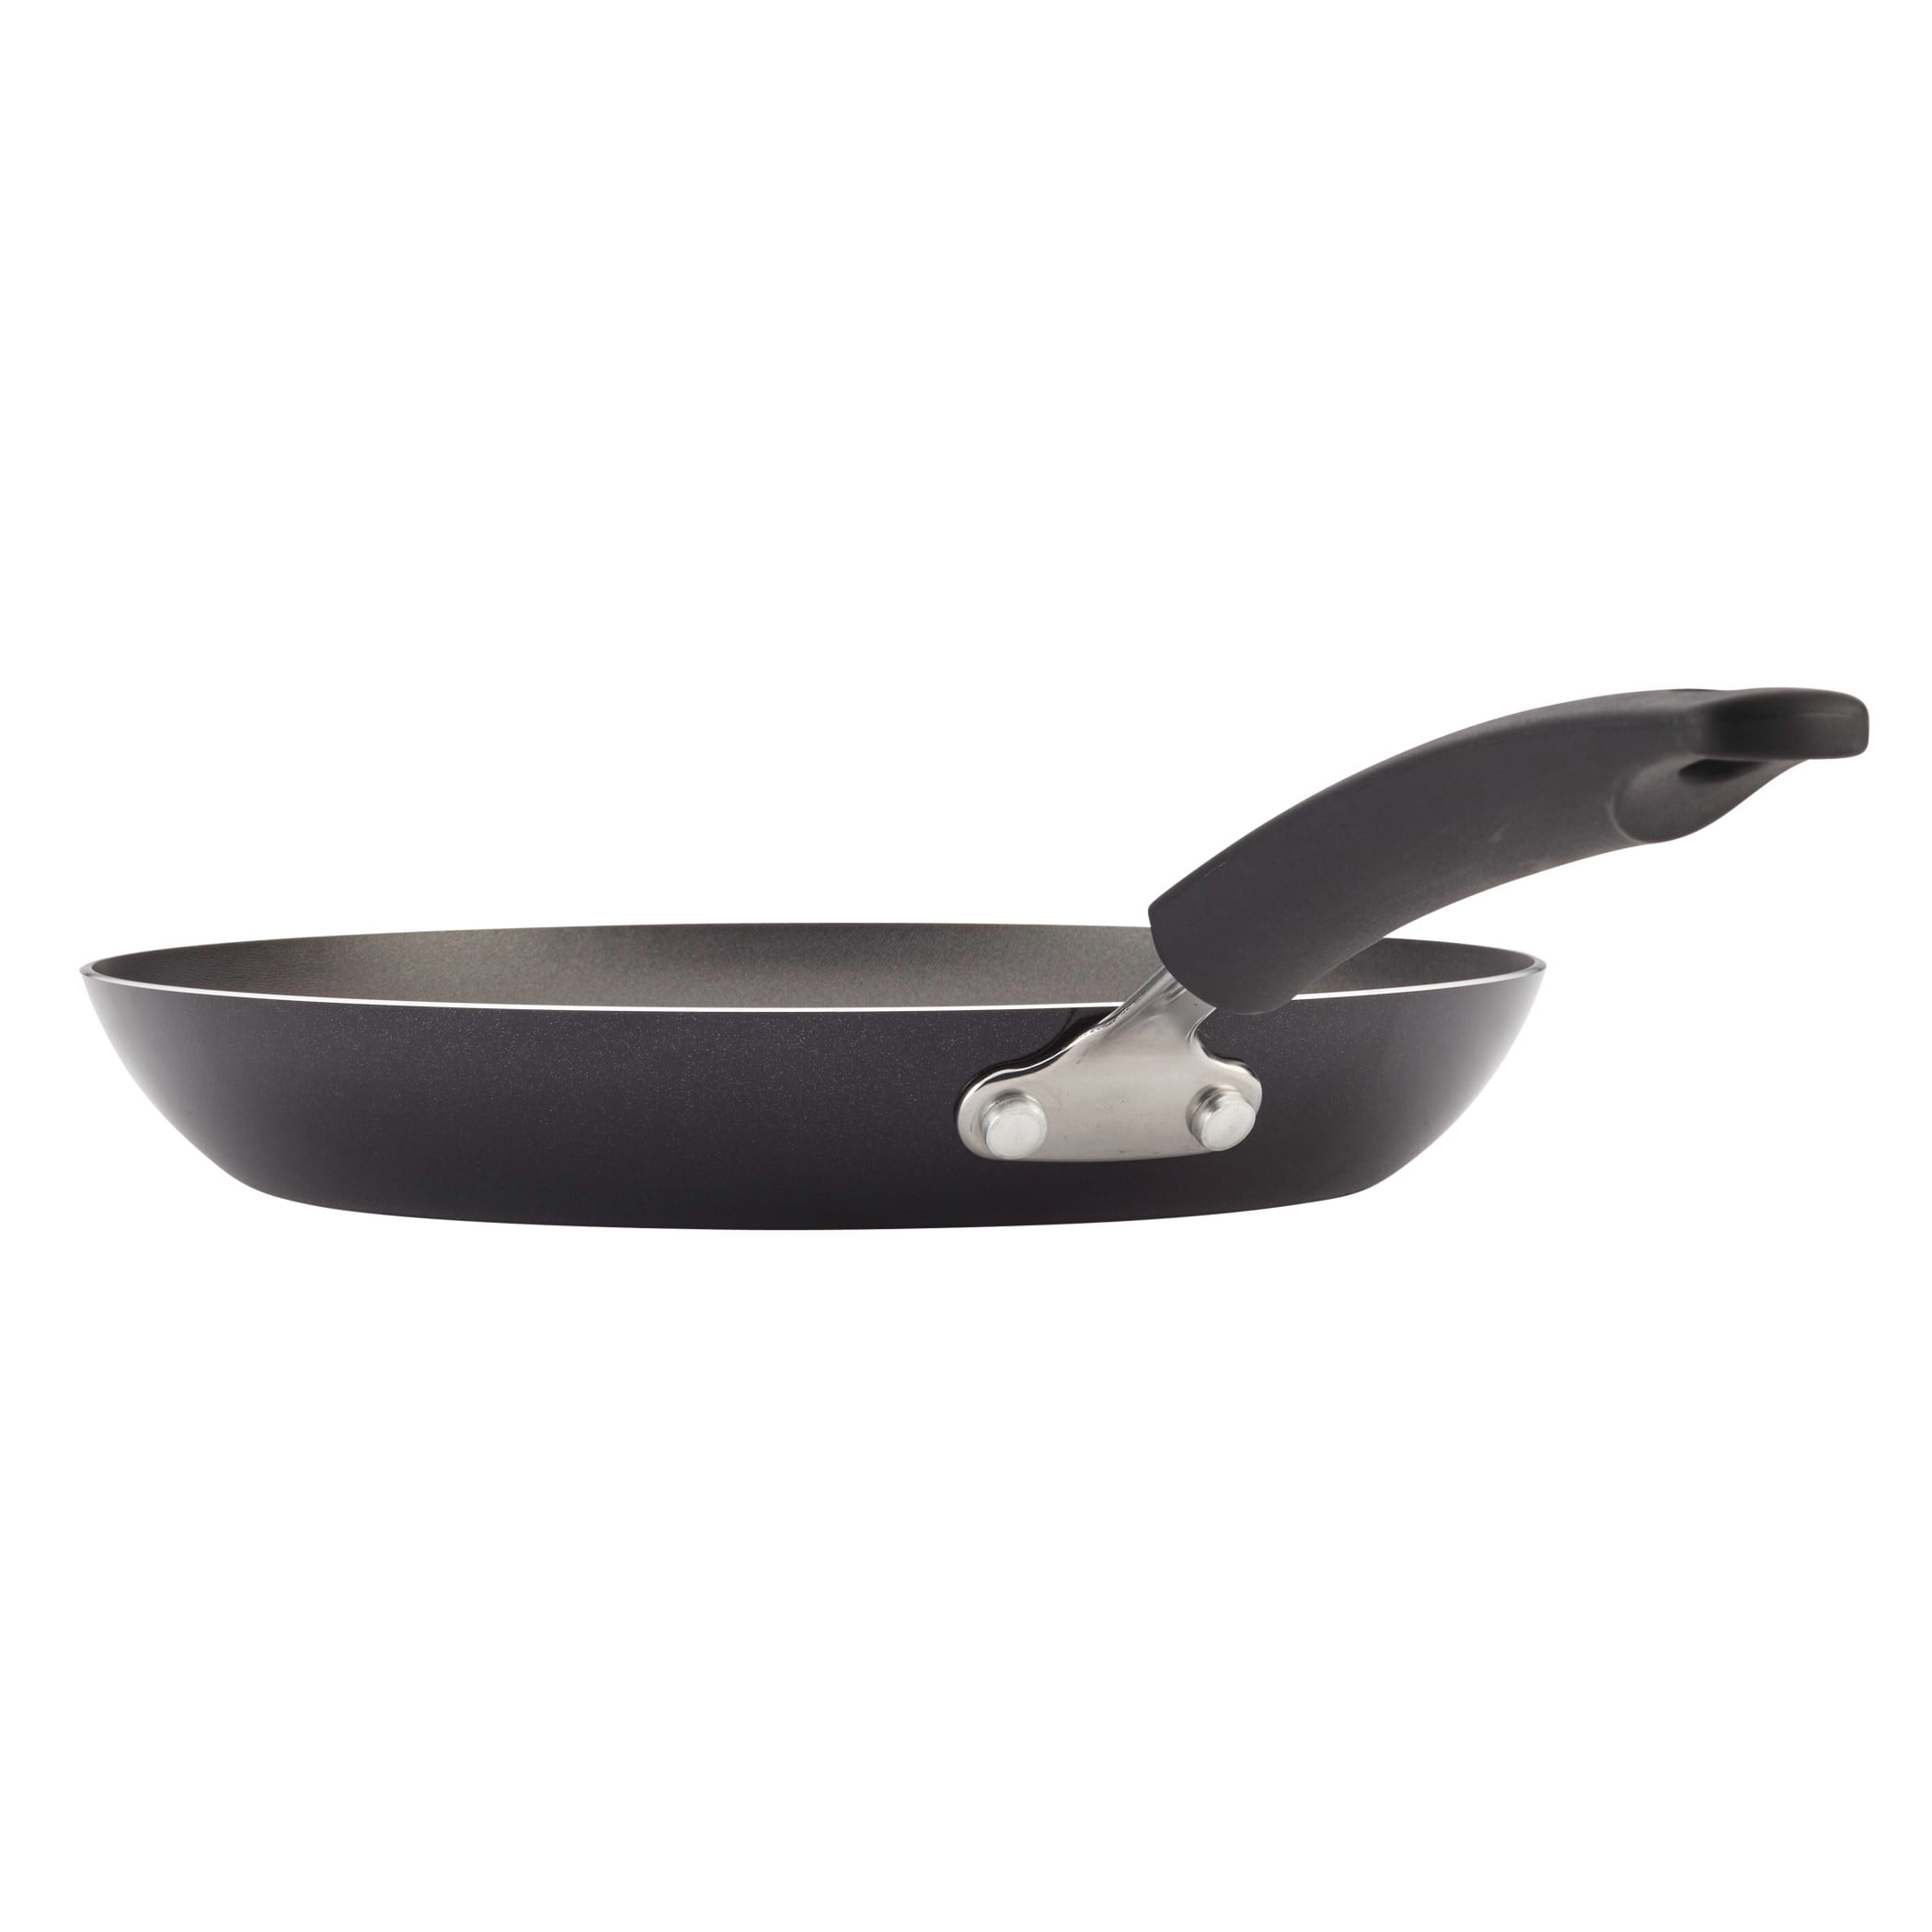 Q.b by Mopita Fluo Frying Pan Nonstick Skillet 8 Inch Black / Silver New